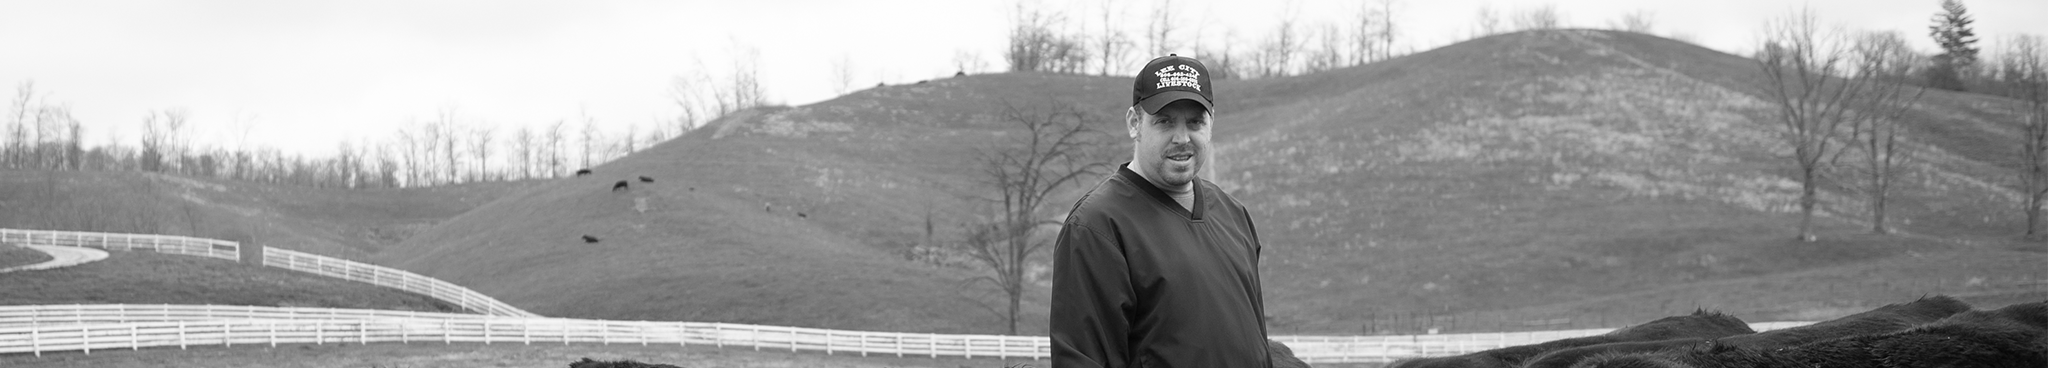 JONATHAN OF JSW FARMS IN LIBERTY (OR HAZEL GREEN), KENTUCKY. TRUSTED SUPPLIER OF RANCH-RAISED BEEF.